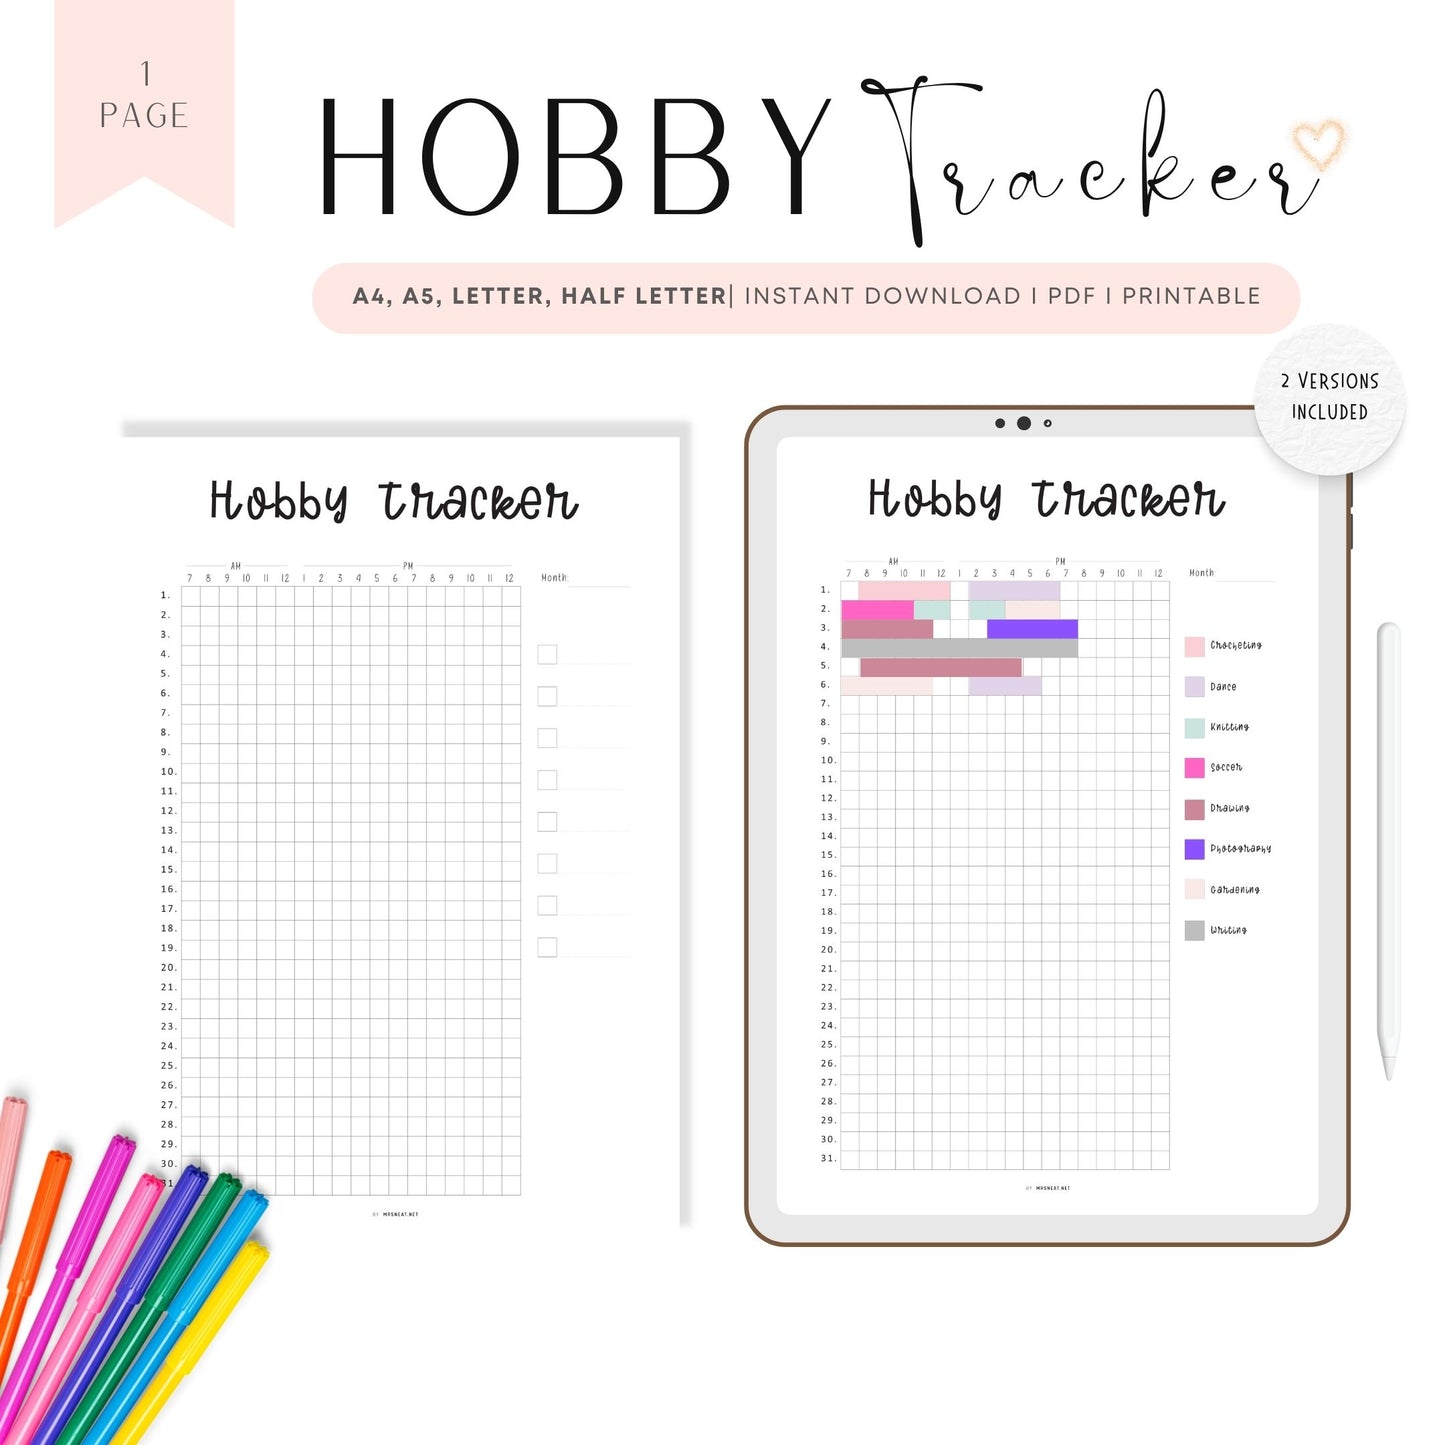 Monthly Hobby Tracker Template PDF